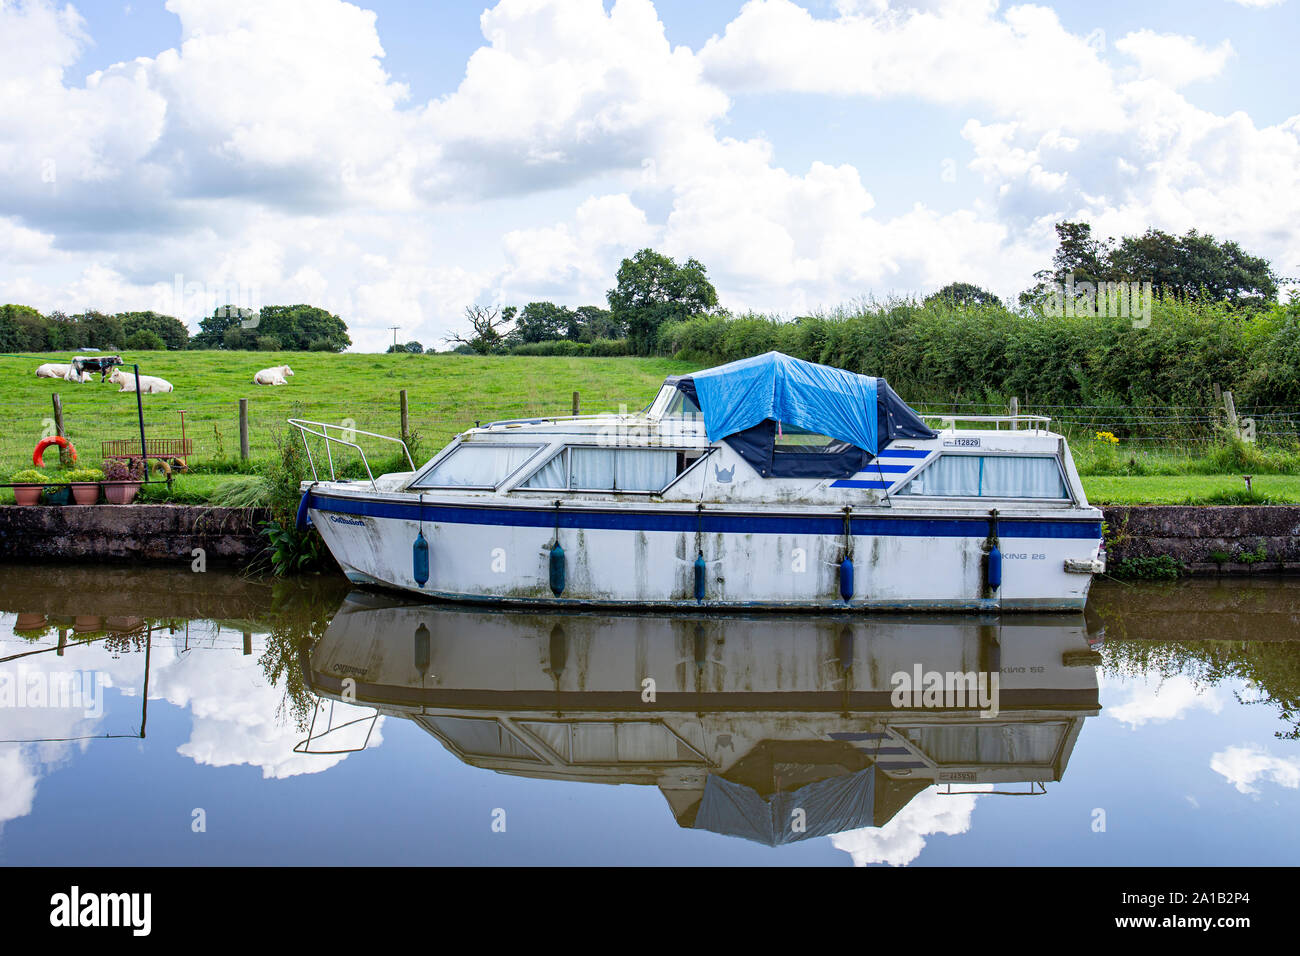 Neglected or derelict pleasure boat on the Trent and Mersey canal in Cheshire UK Stock Photo